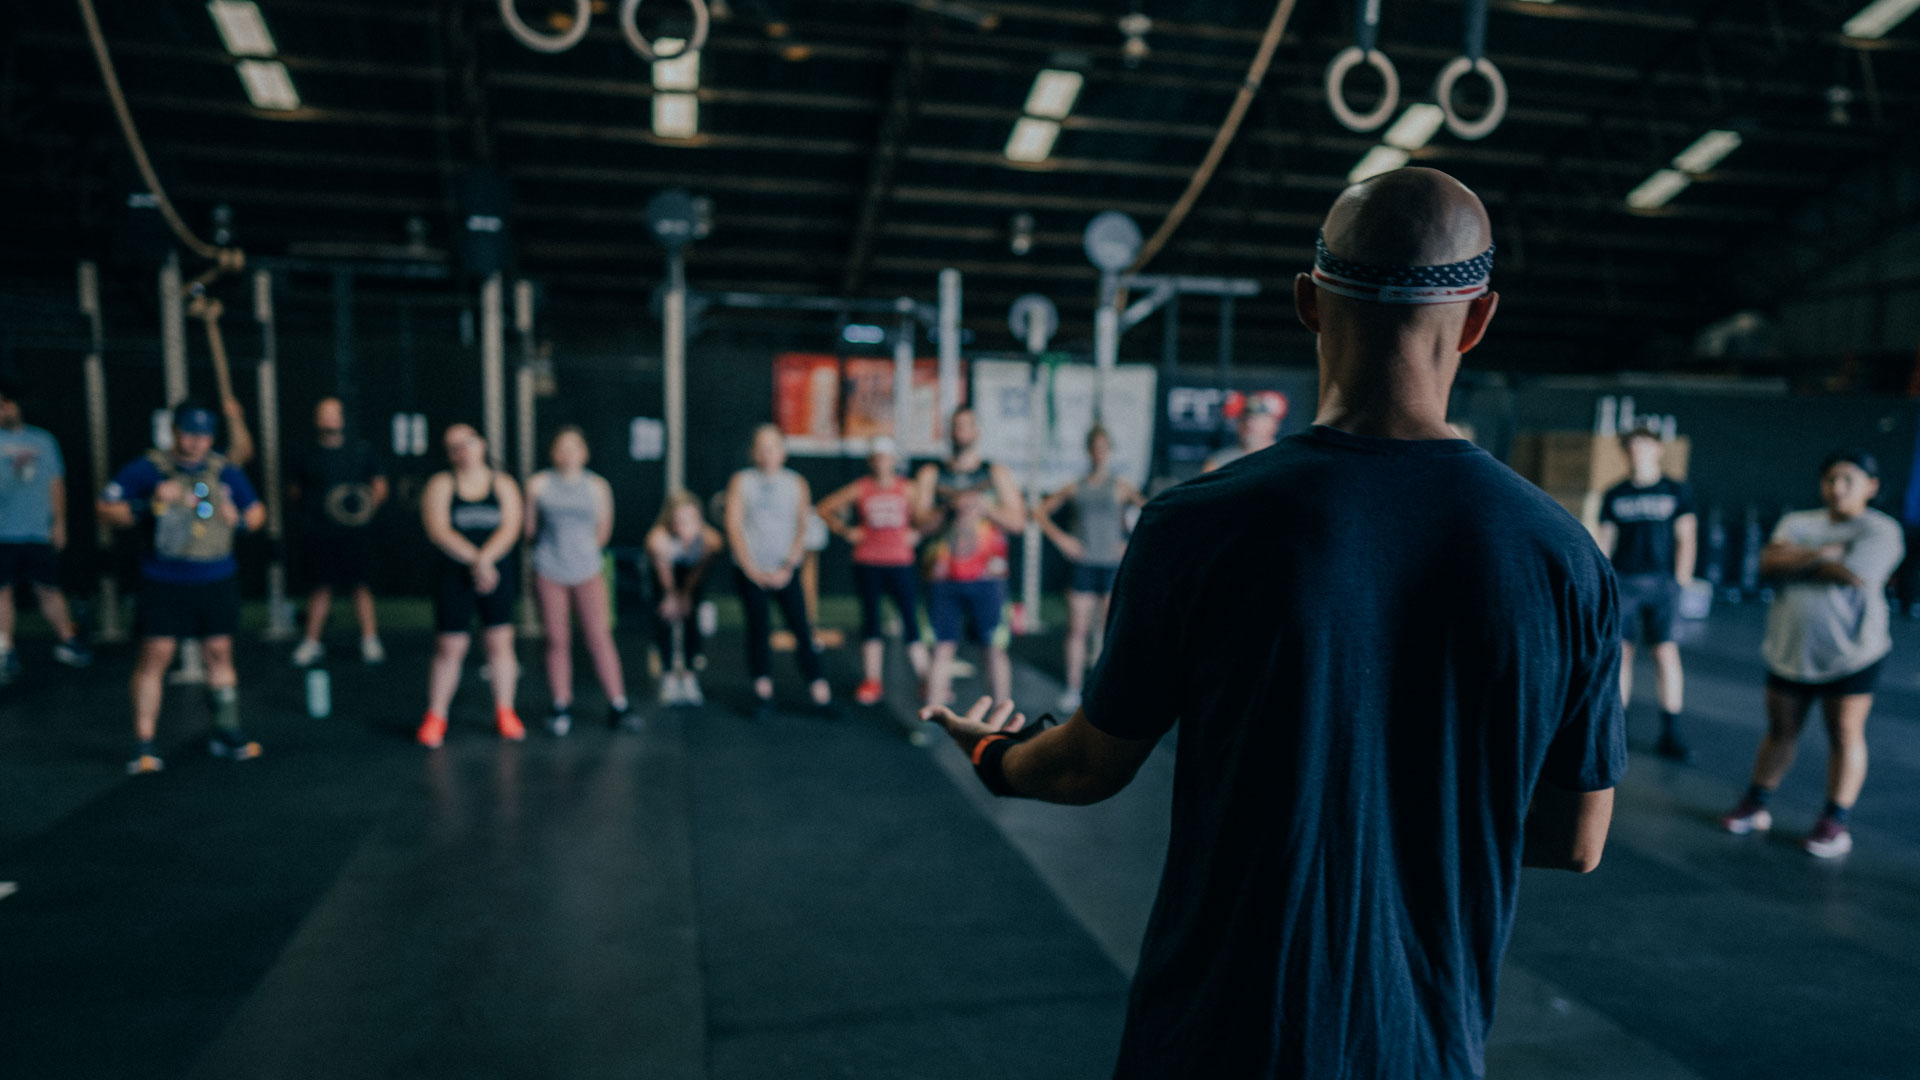 A CrossFit Session: An Inside Look